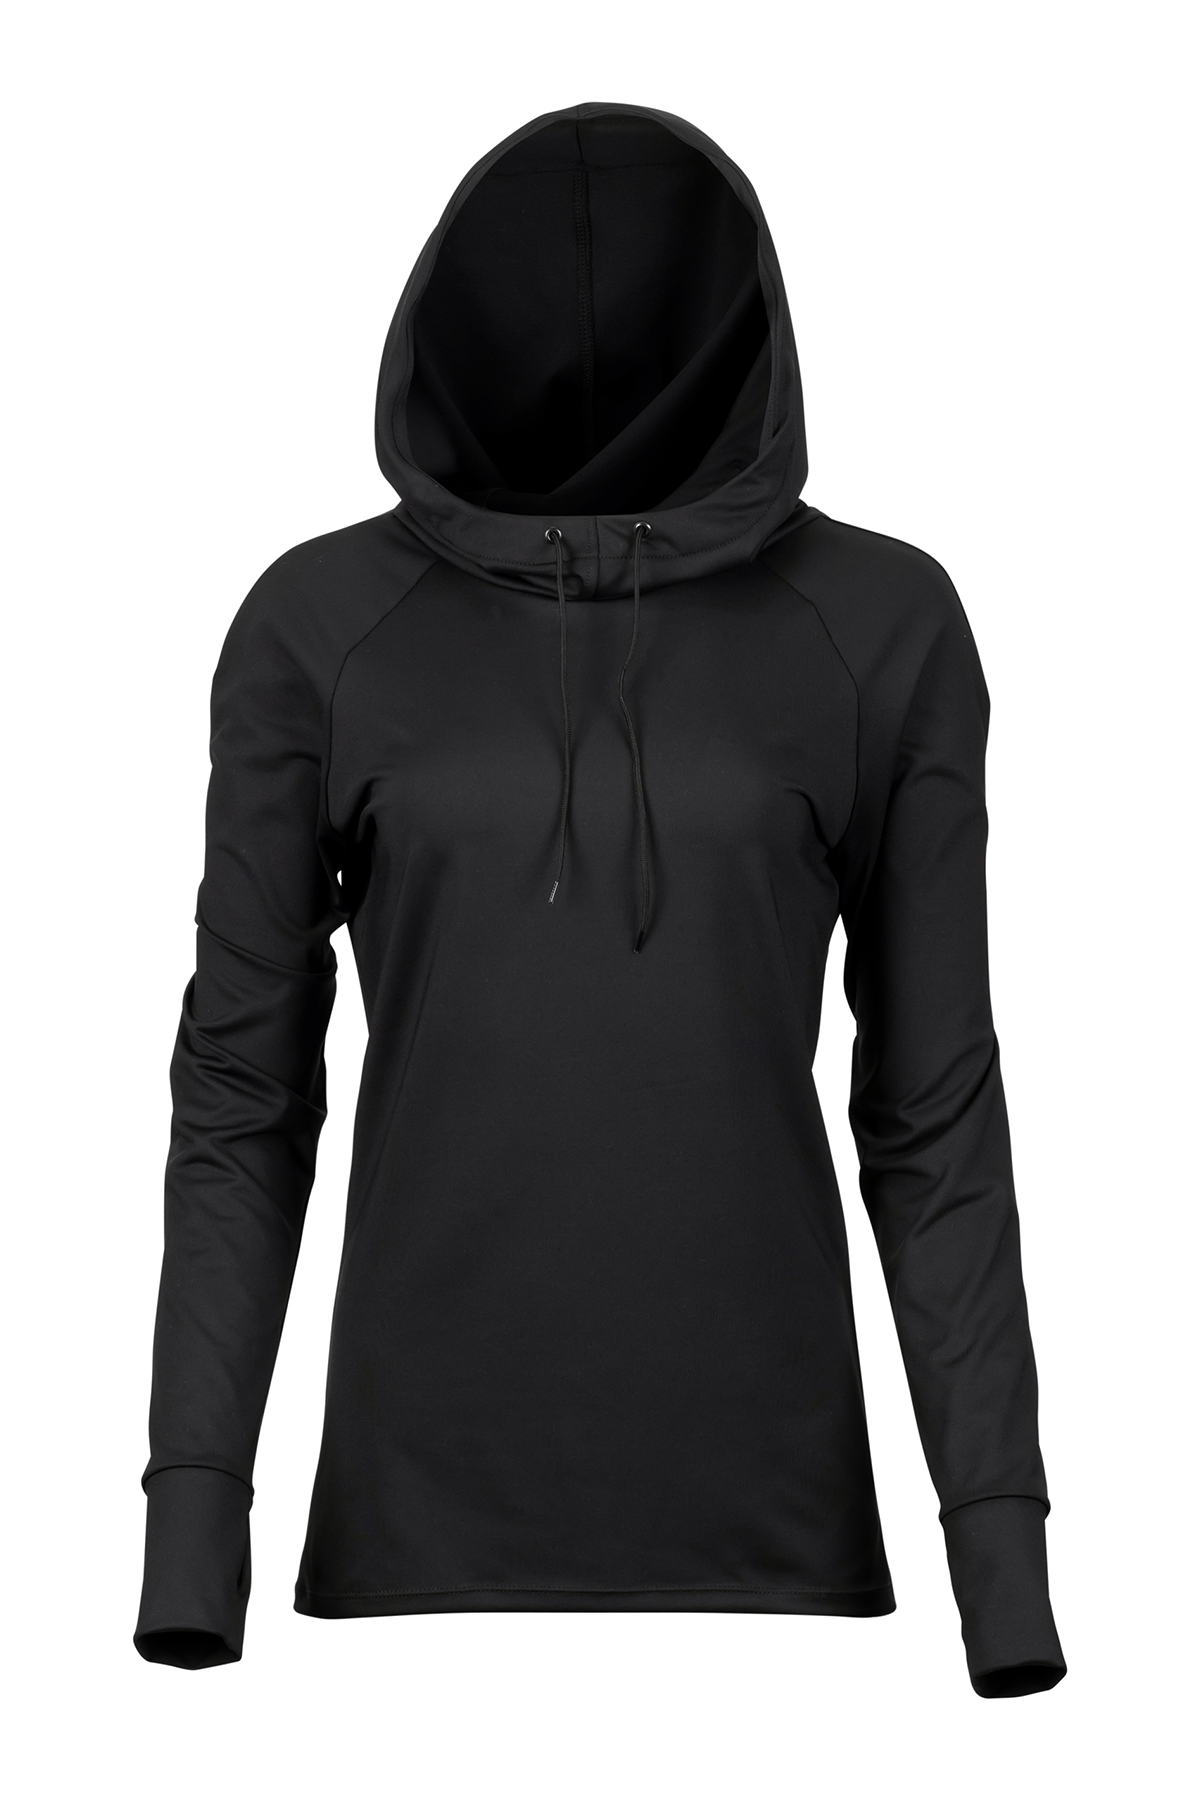 BOATHOUSE Women's 215 Hooded Compression Top